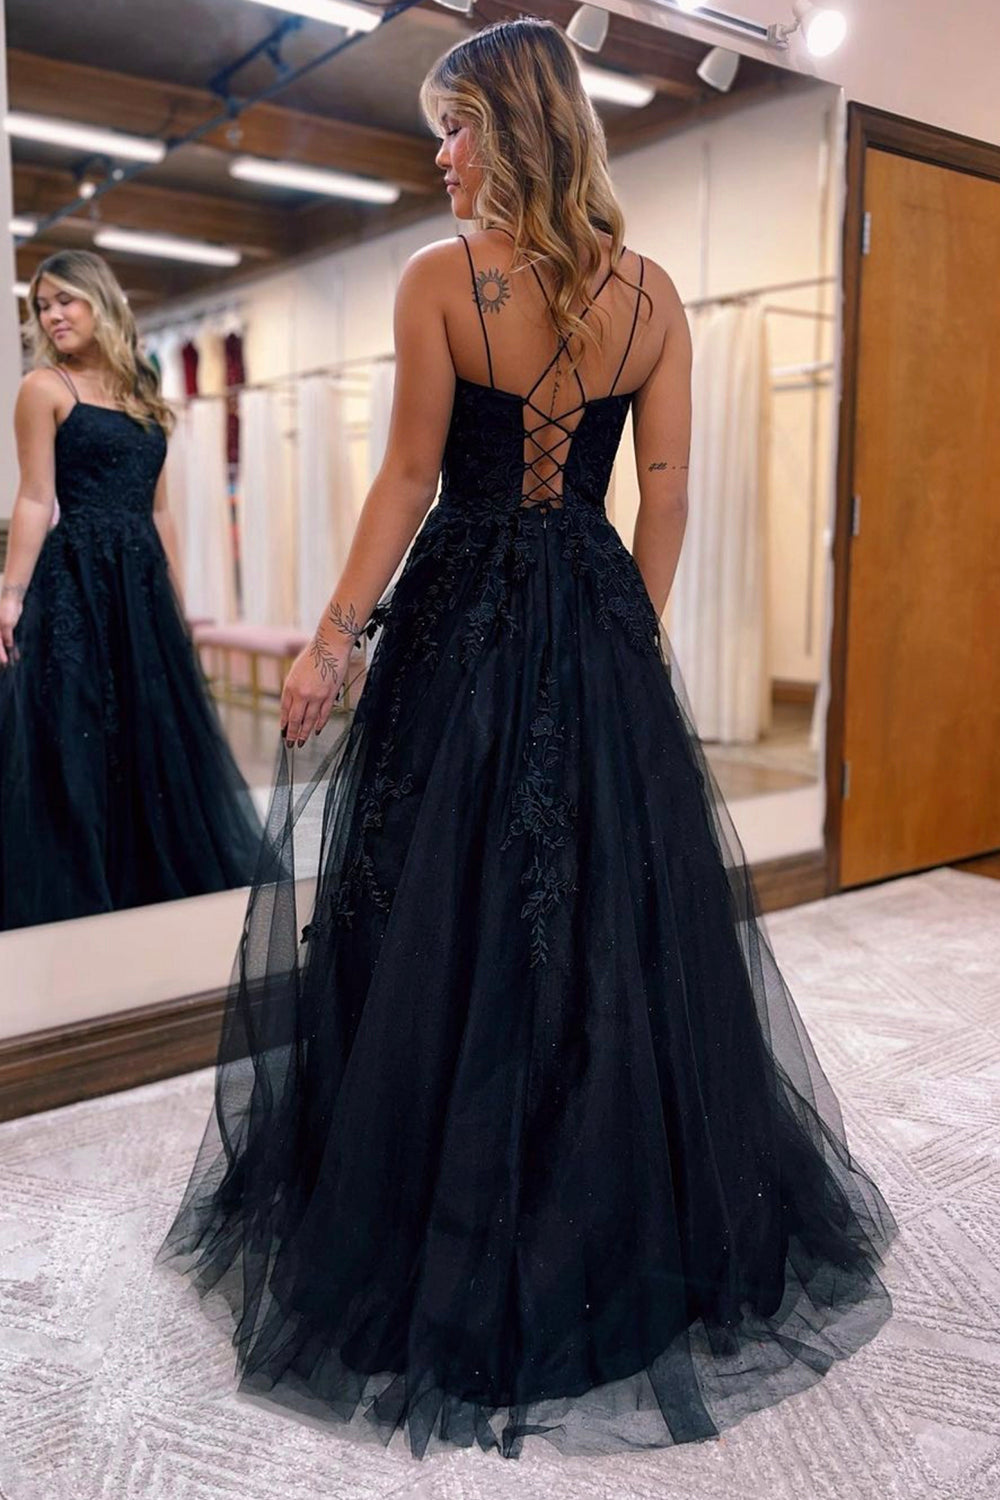 Black Tulle Lace Long Prom Dress, A-Line Evening Party Dress